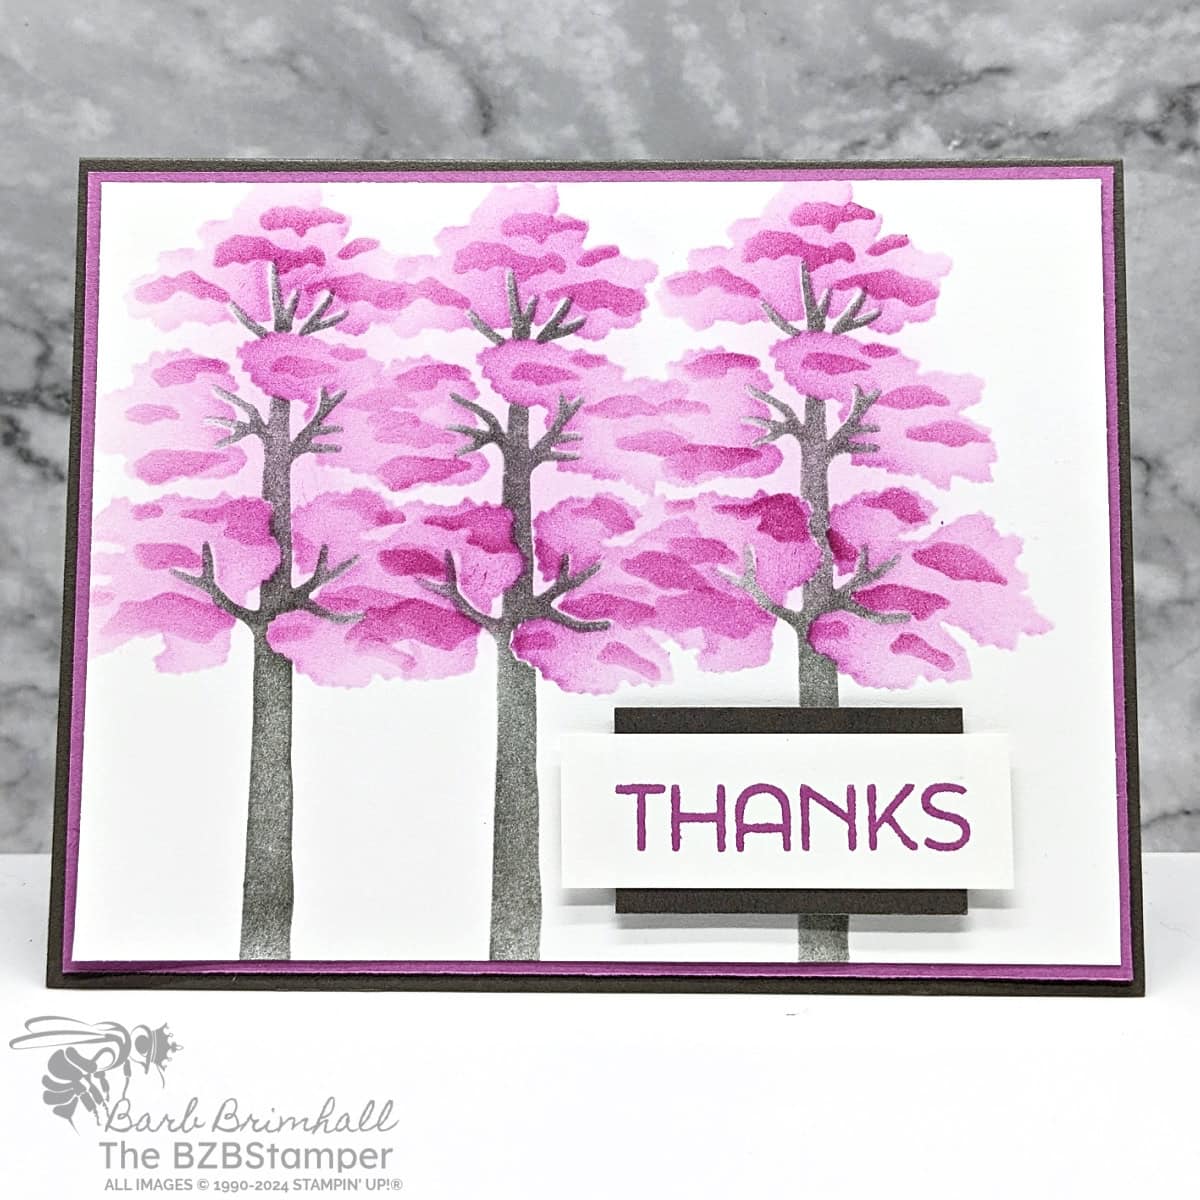 Thank You Card Using the Frosted Forest Masks